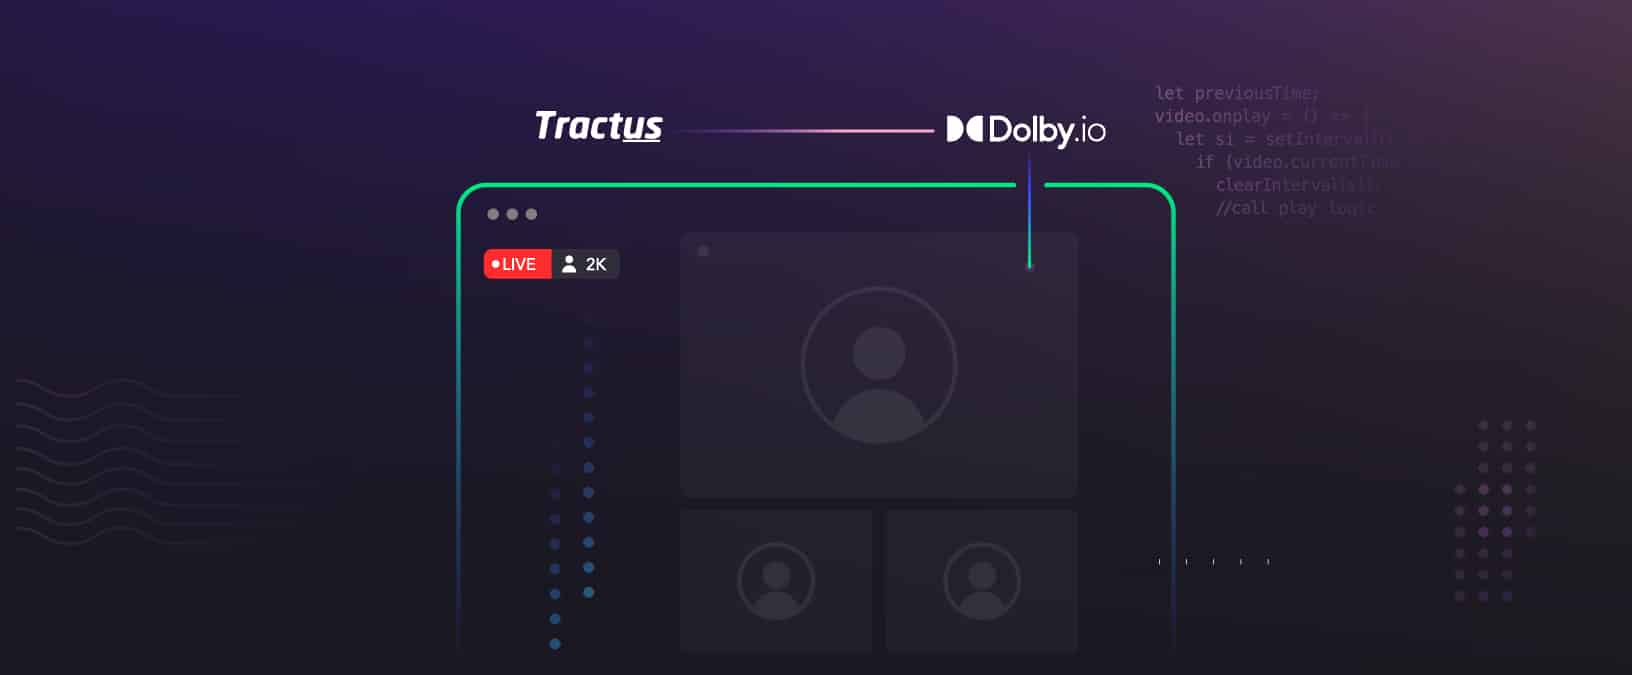  Tractus Video Chat powered by Dolby.io